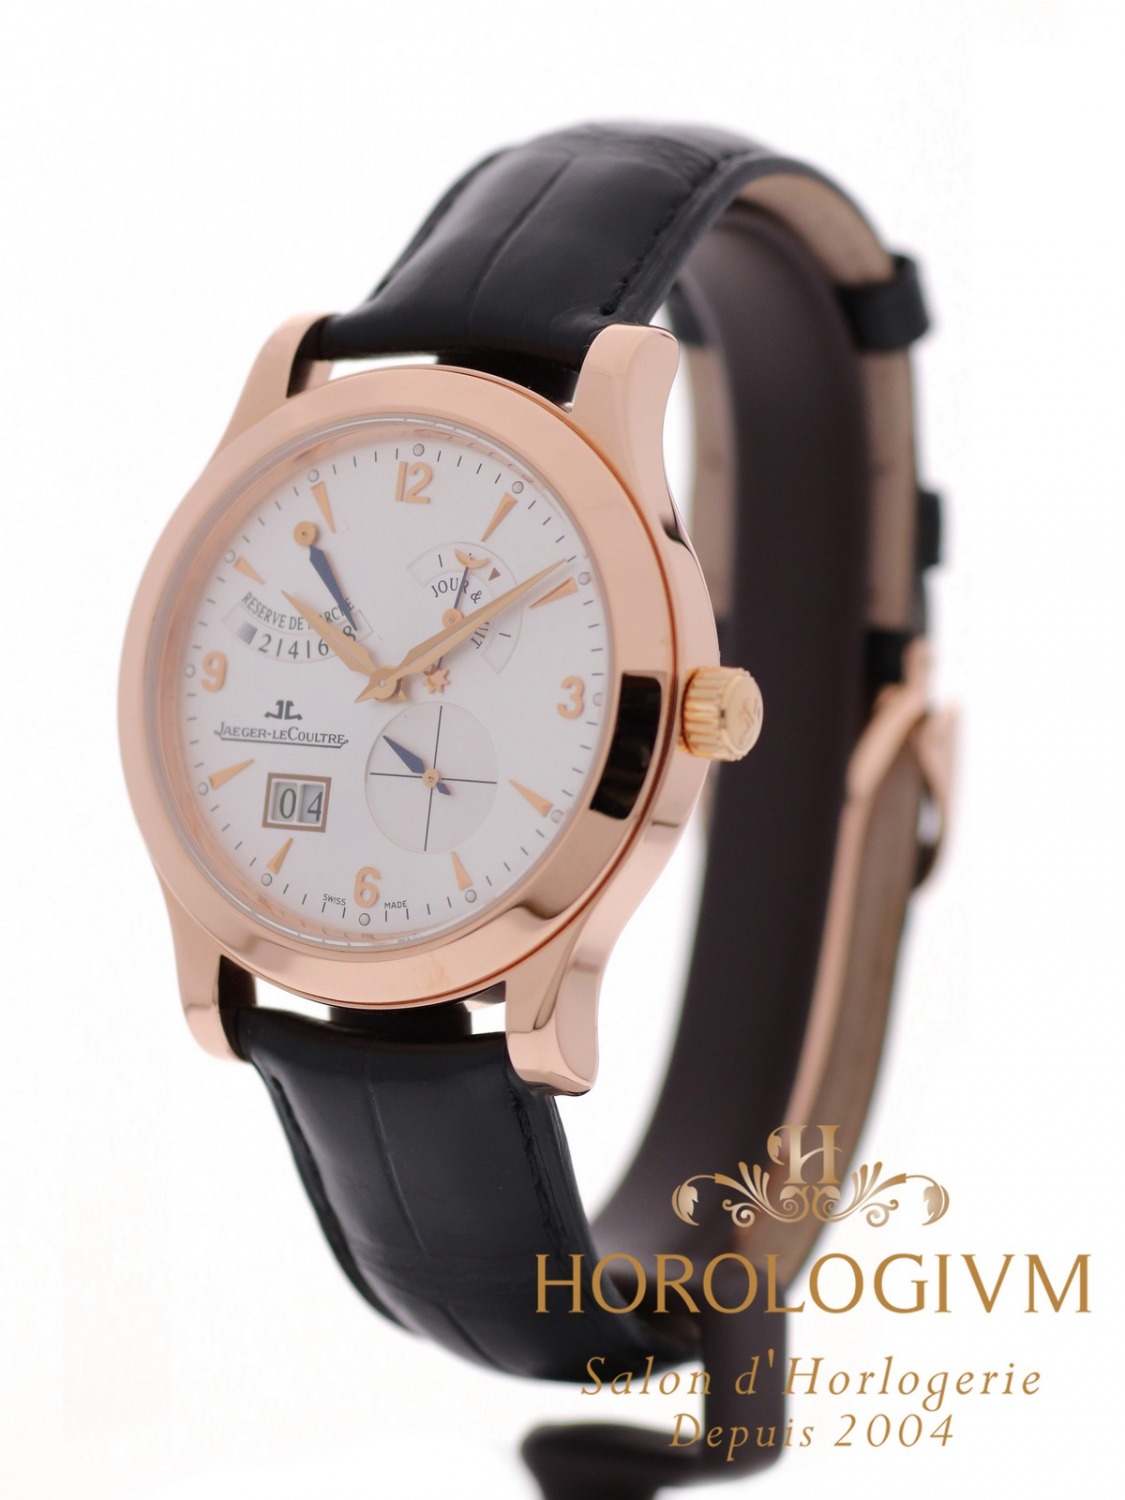 Jaeger-LeCoultre Master Control 8 Days Power Reserve Rose Gold watch, rose gold